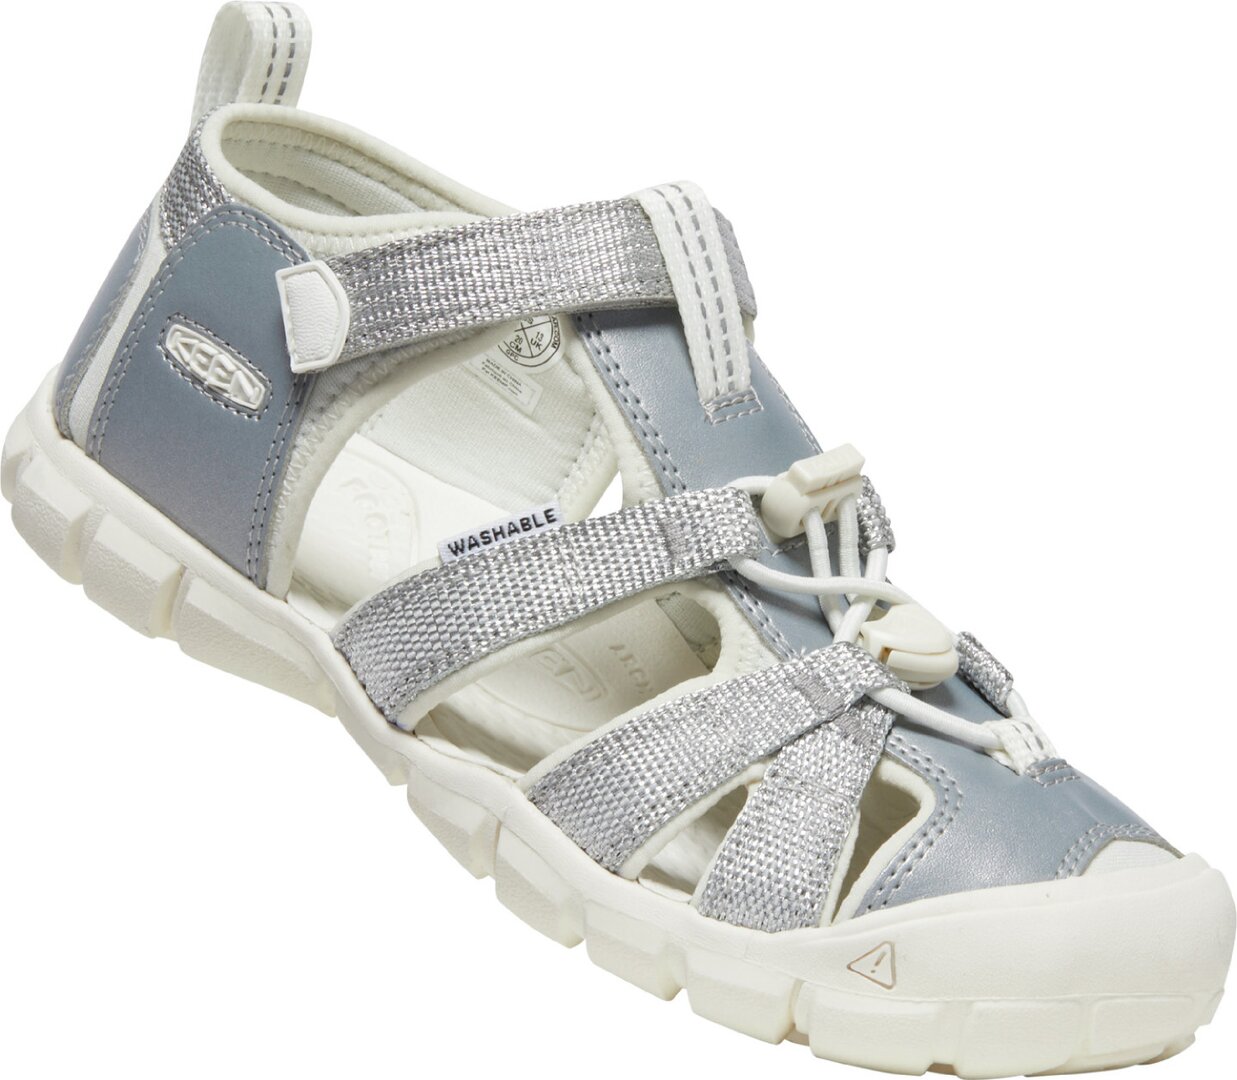 Sandály Keen SEACAMP II CNX YOUTH silver/star white US 2